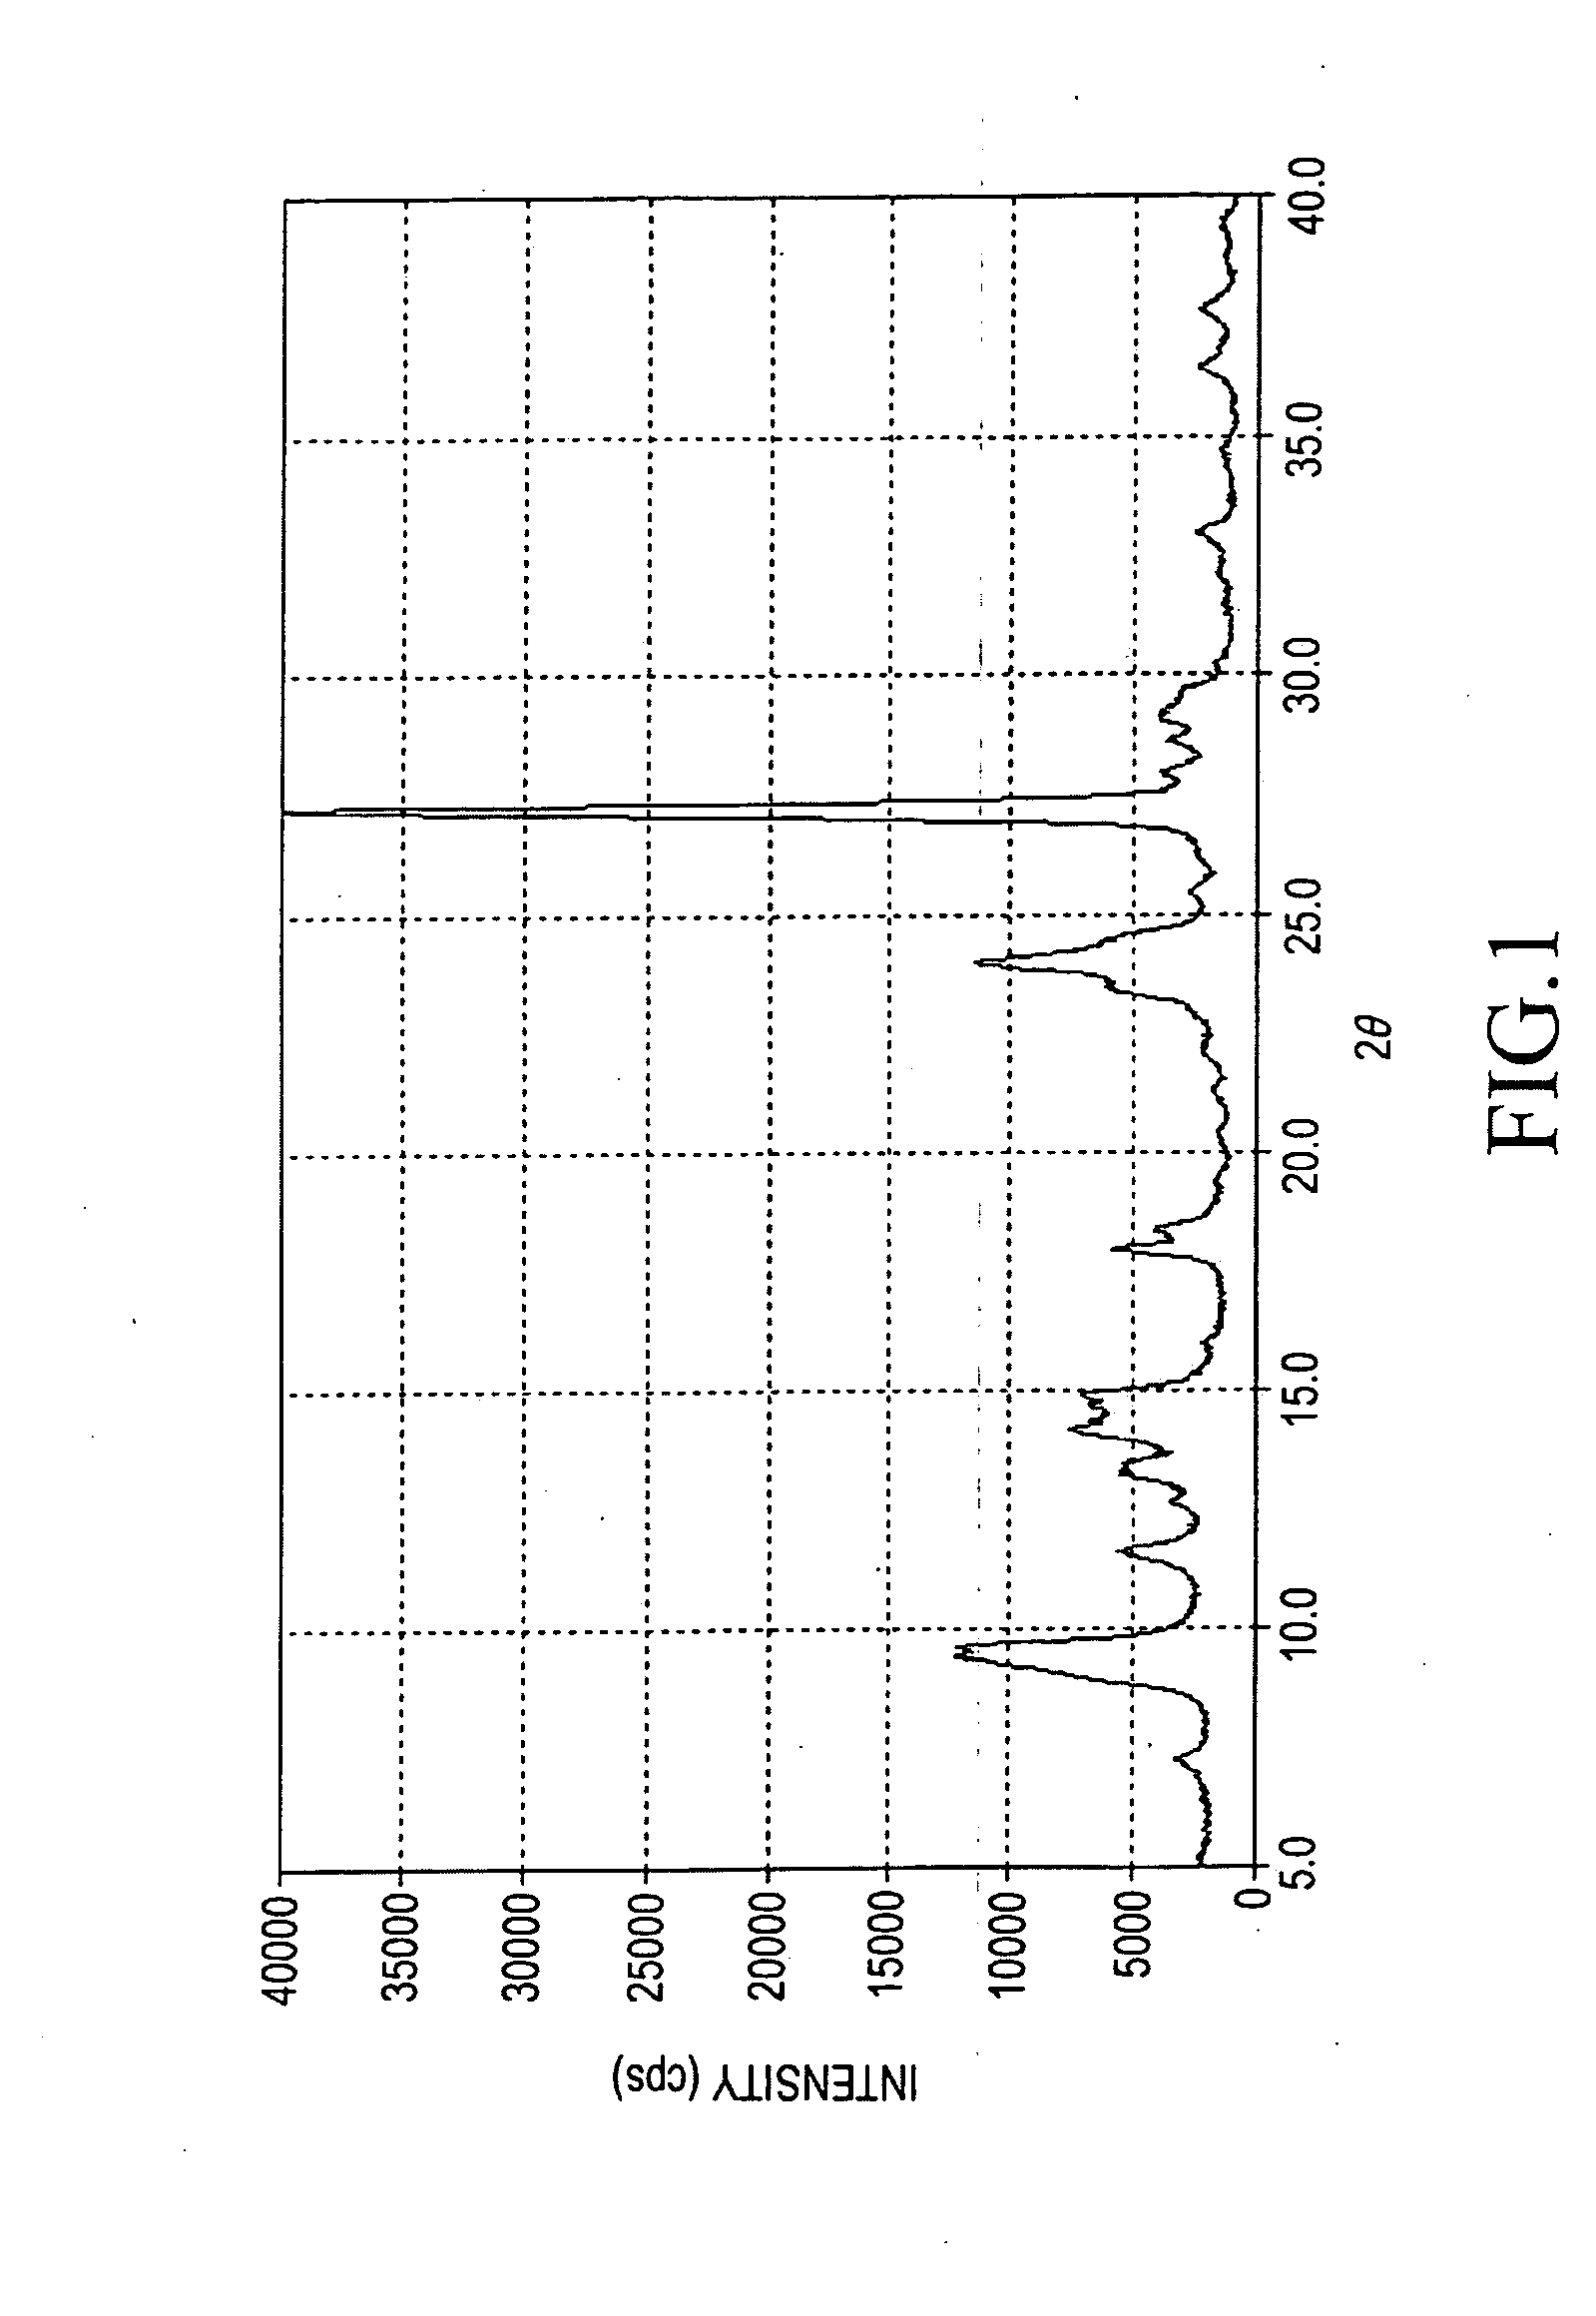 Titanylphthalocyanine comprising specific polymorph and method for producing thereof, and electrophotographic photoreceptor comprising charge generating material thereof